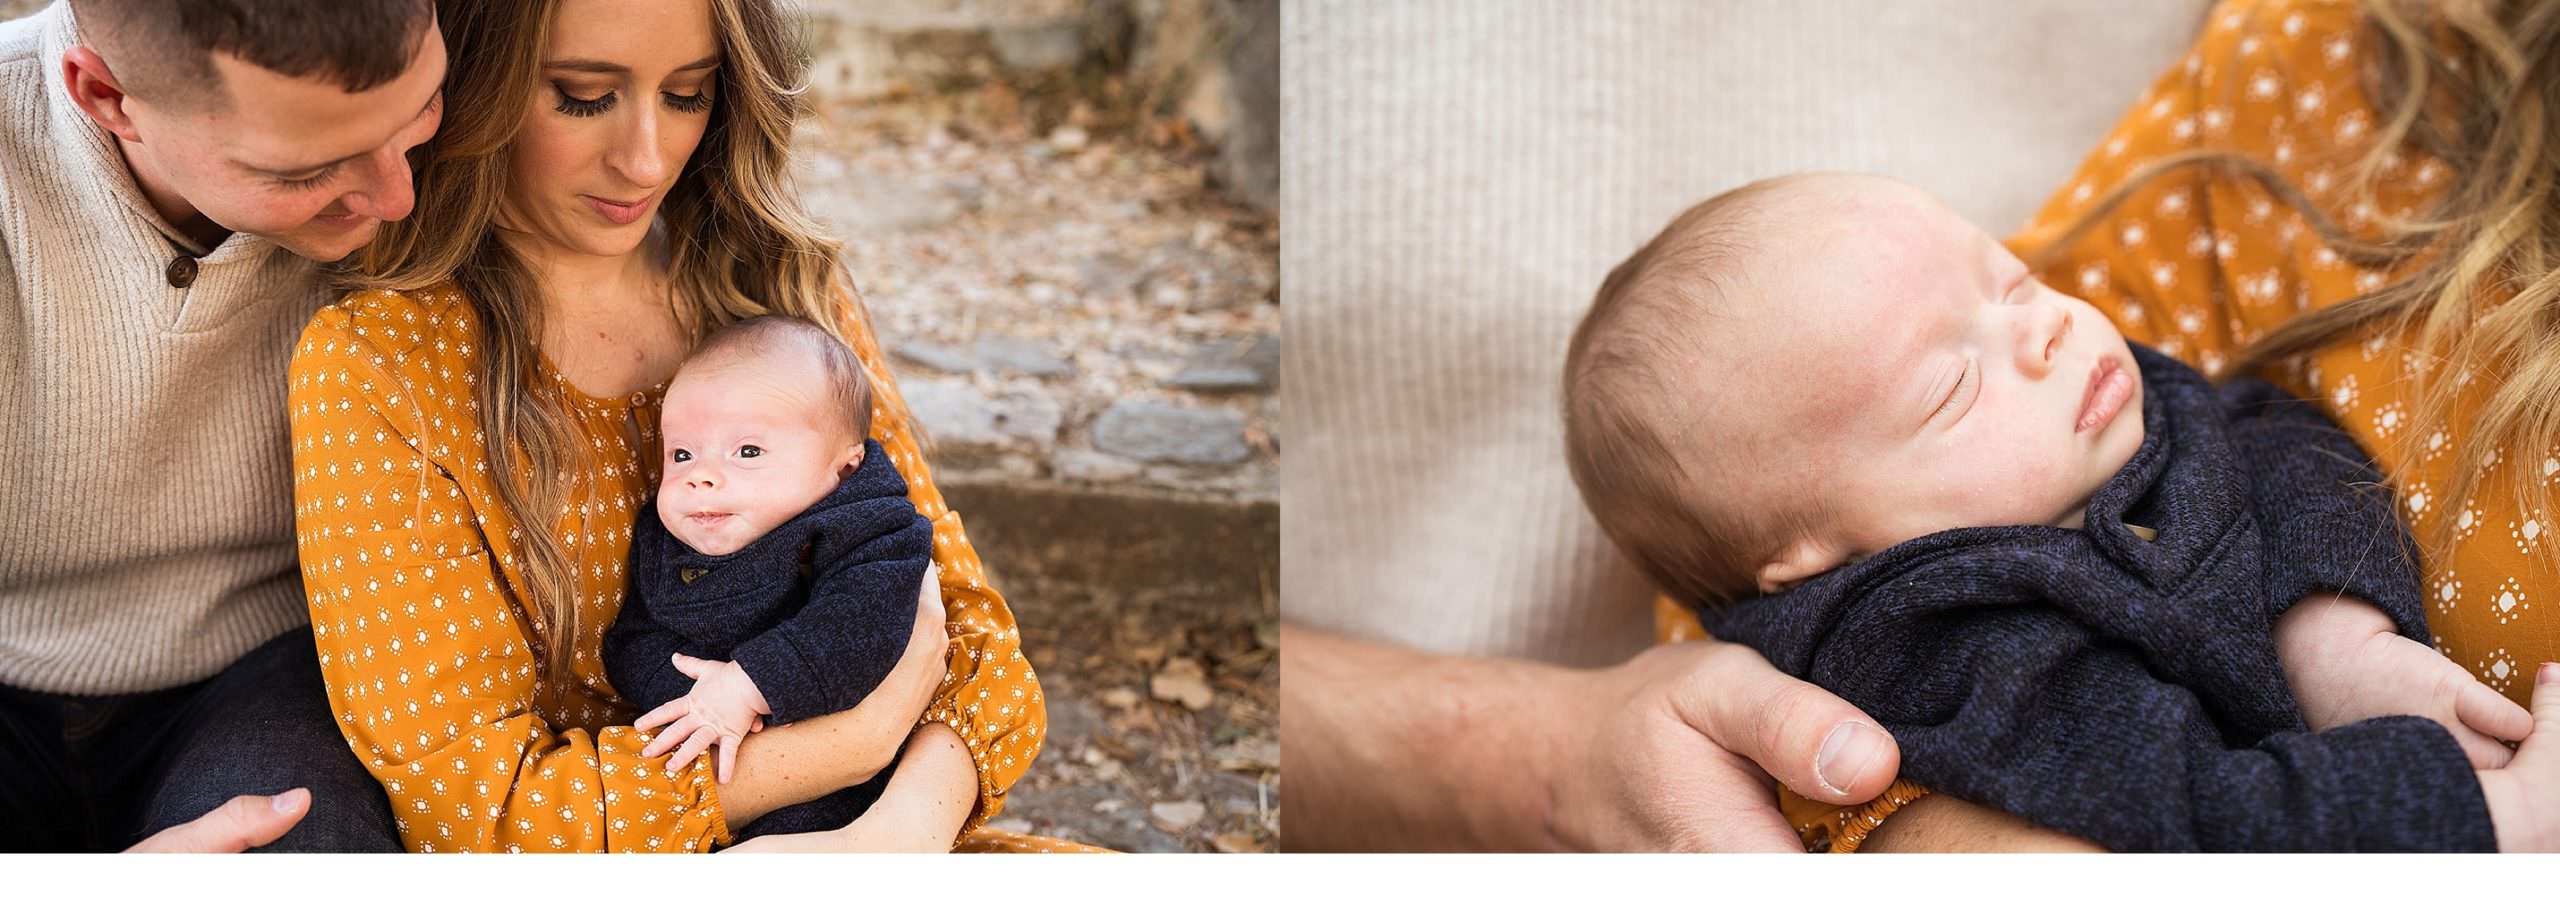 Baby photography in Oceanside, Baby Photography in FAllbrook, Baby Photography in Vista, Baby photography in Carlsbad